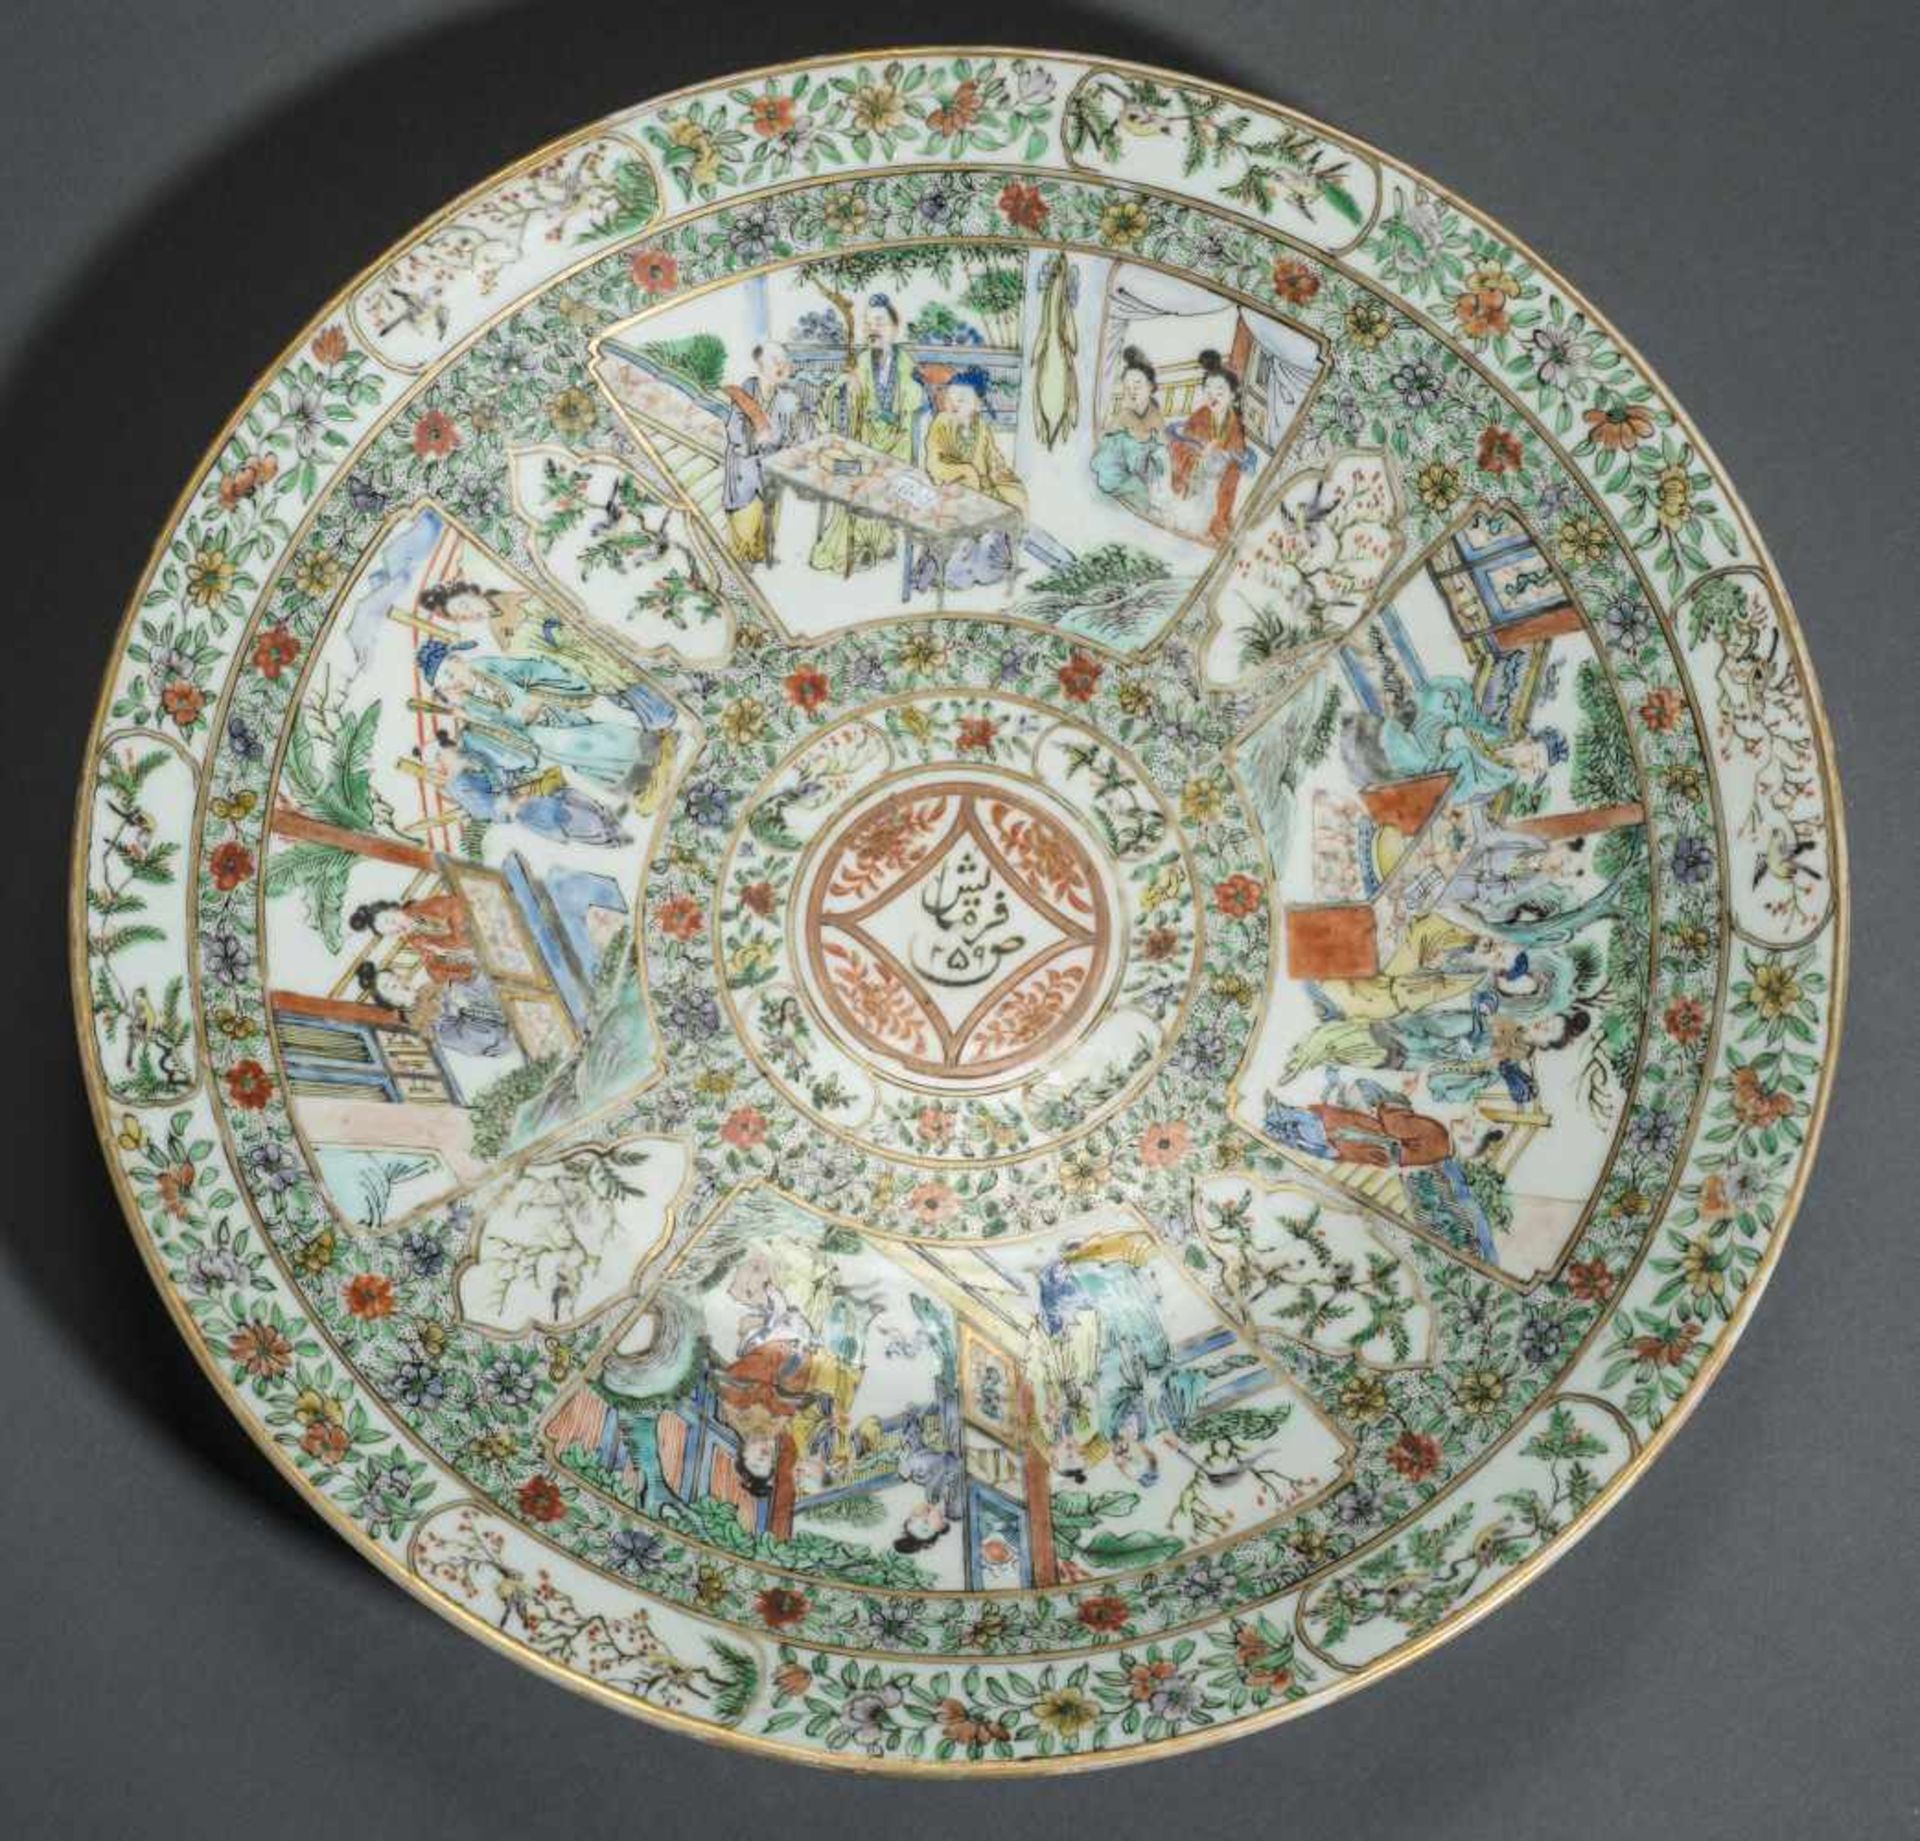 LARGE PLATE WITH SCHOLARS AND GARDEN DEPICTIONSPorcelain with enamel painting and goldChina, Qing